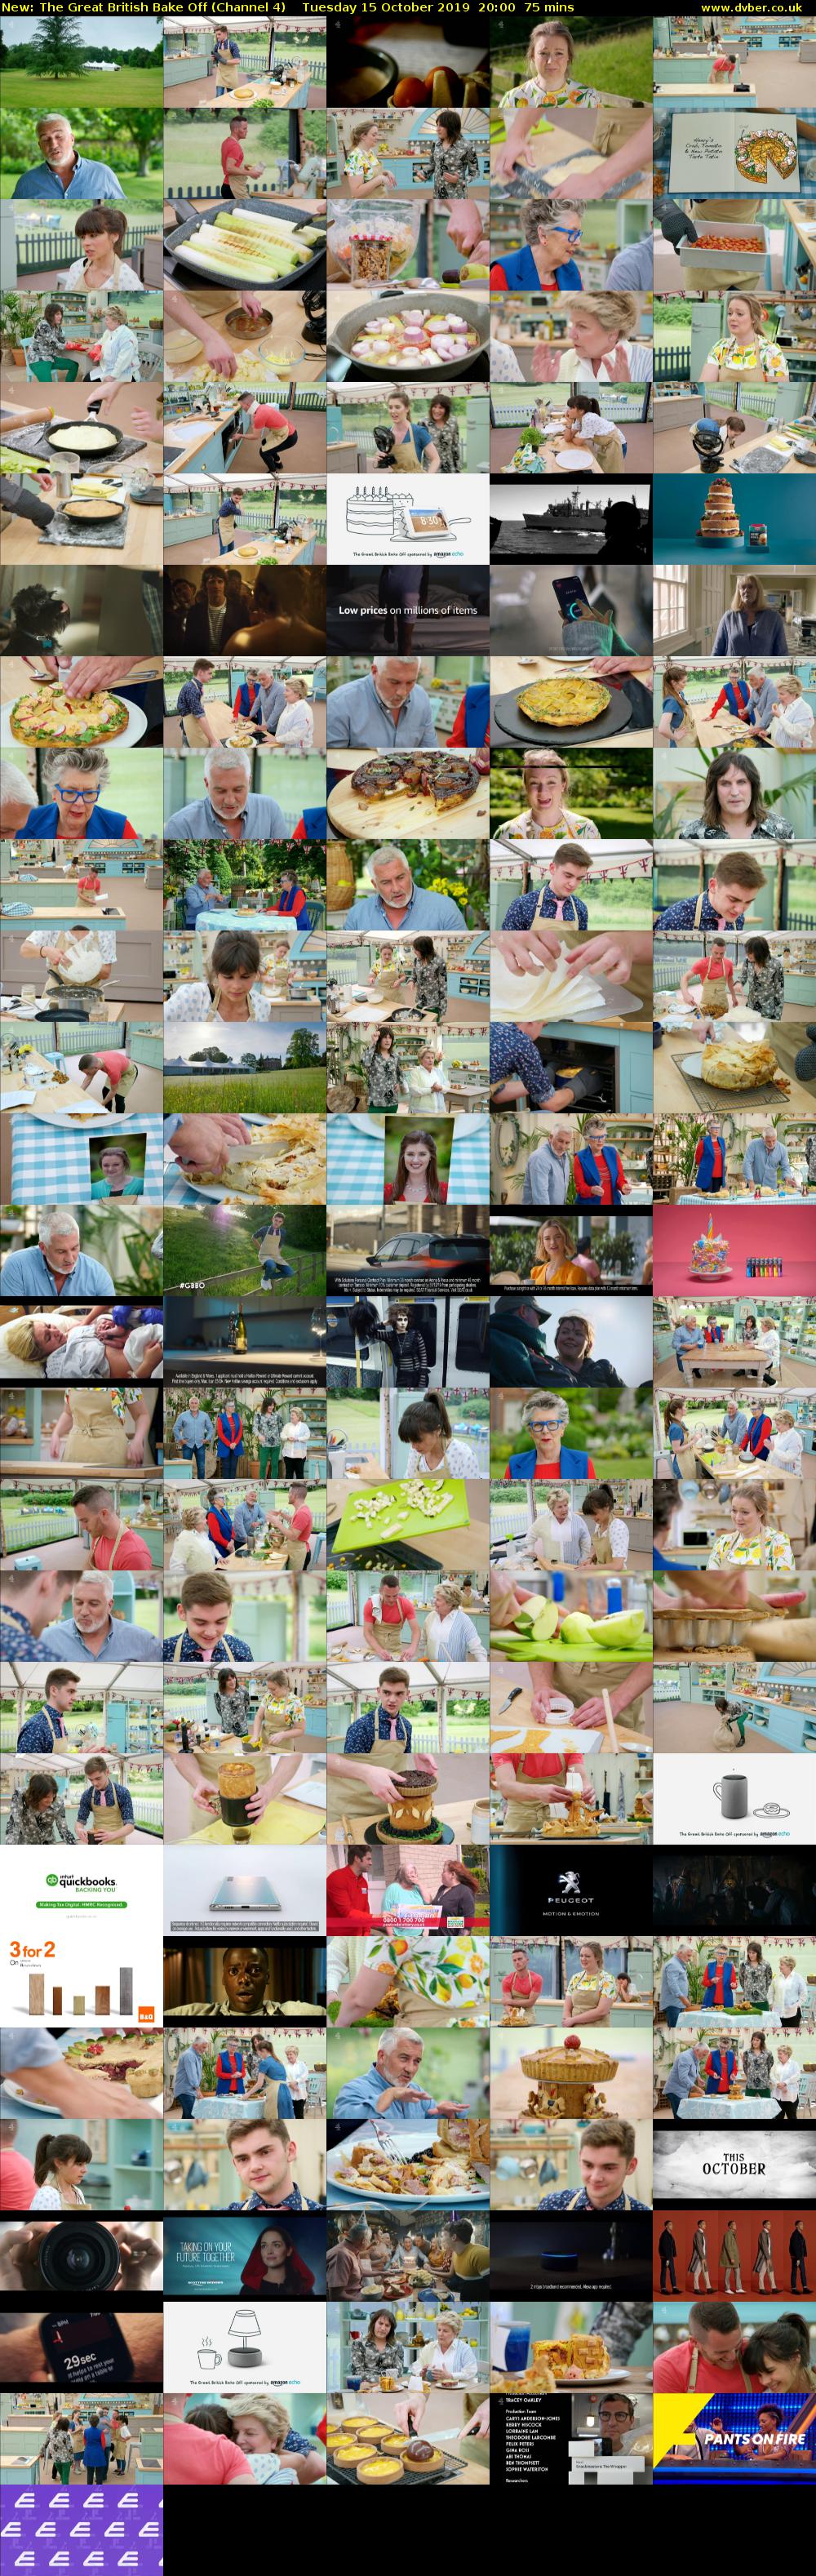 The Great British Bake Off (Channel 4) Tuesday 15 October 2019 20:00 - 21:15